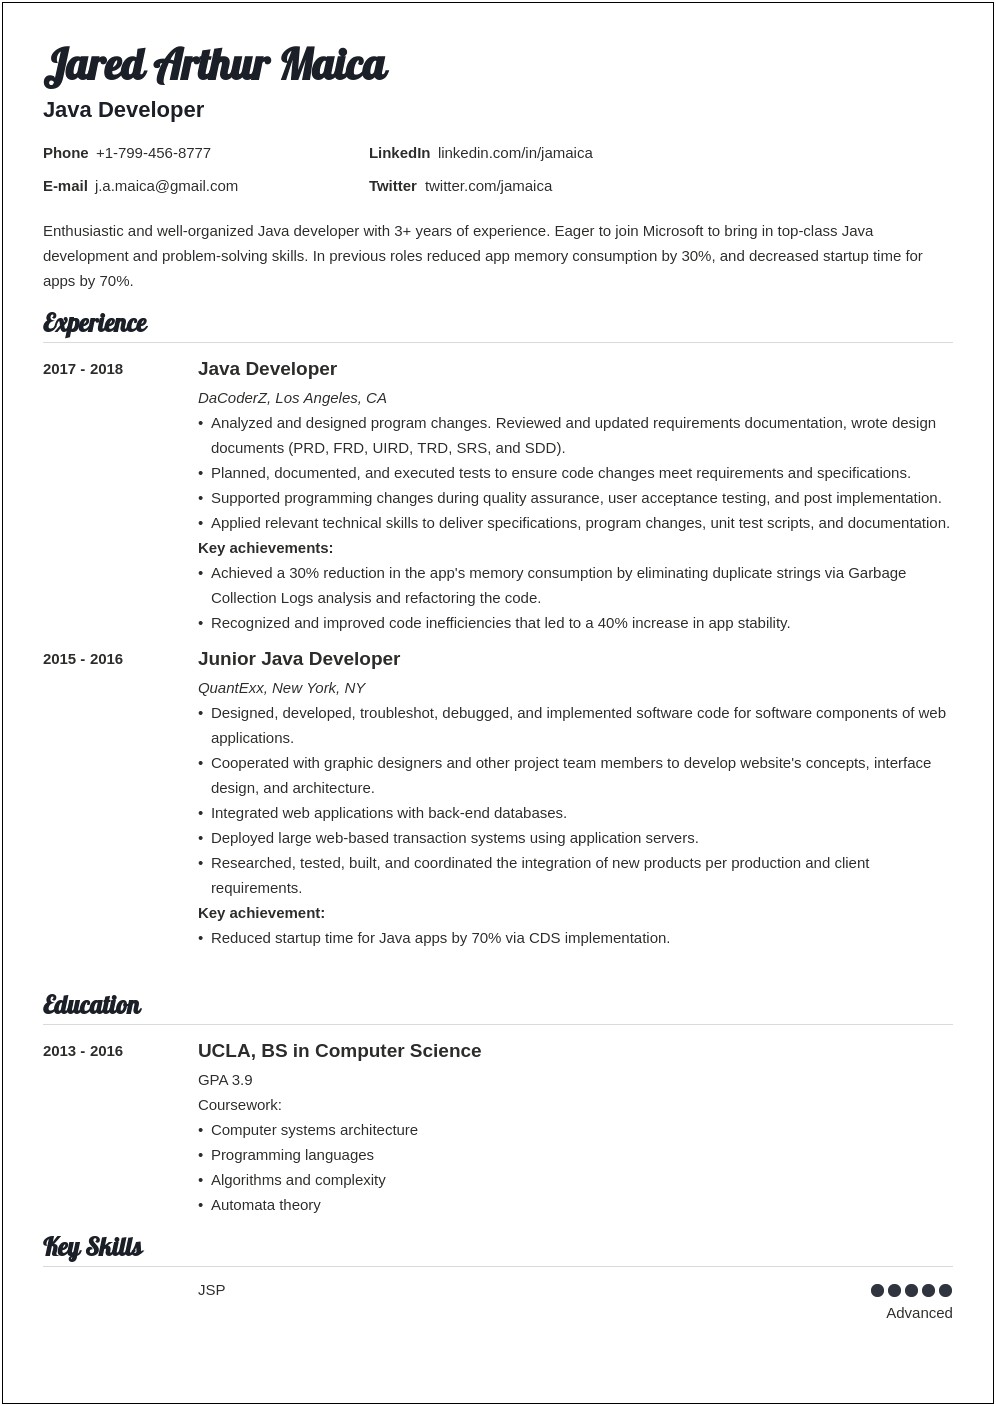 Java Developer With Sfx Experience Resume